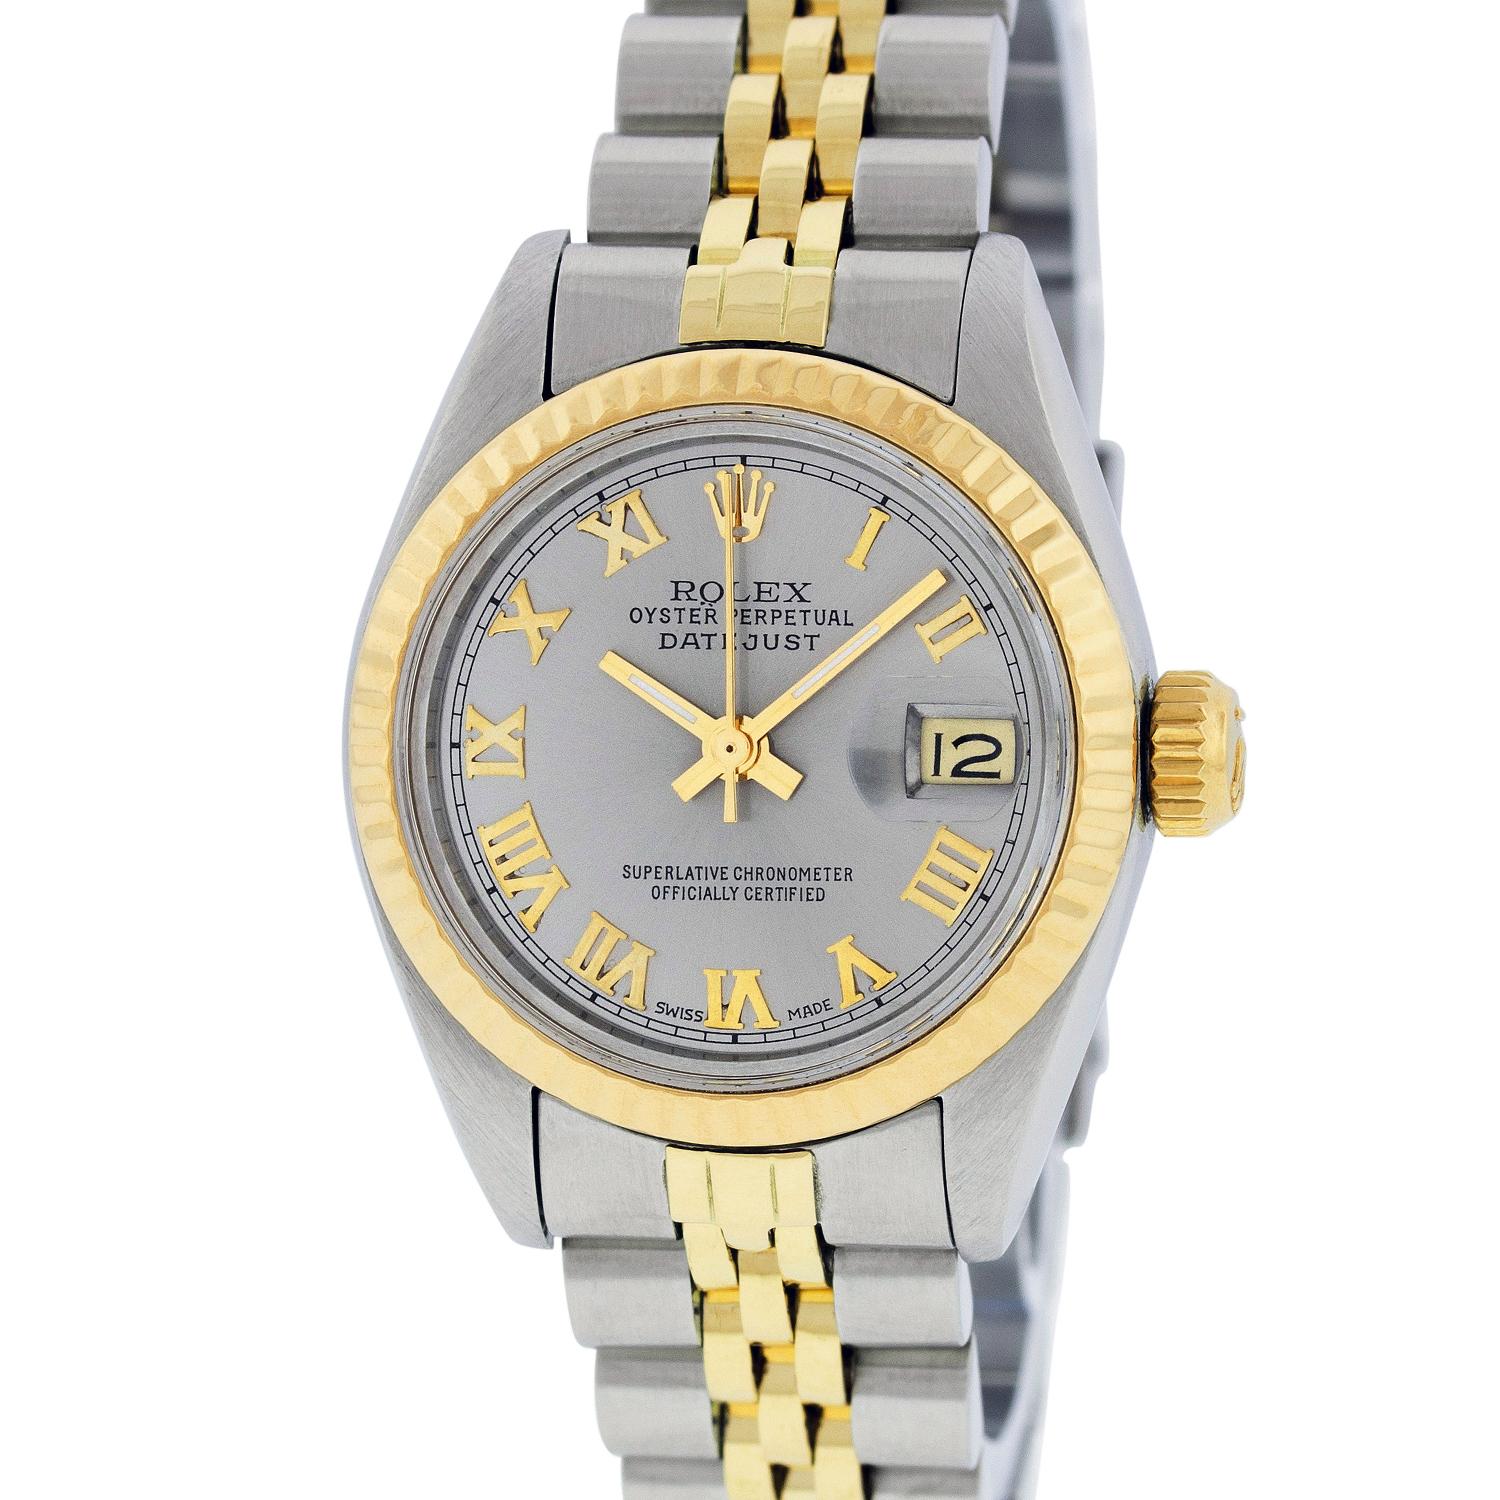 Pre-Owned Rolex Ladies Datejust 26mm Steel and Yellow Gold Gray Roman Watch Jubilee Band

WATCH DESCRIPTION

BRAND  -  Rolex

MODEL  -  Datejust

CASE SIZE   -  26mm

GENDER  -  Women's

CASE  -  Rolex Stainless Steel Case

WATCH FEATURES

DIAL  - 